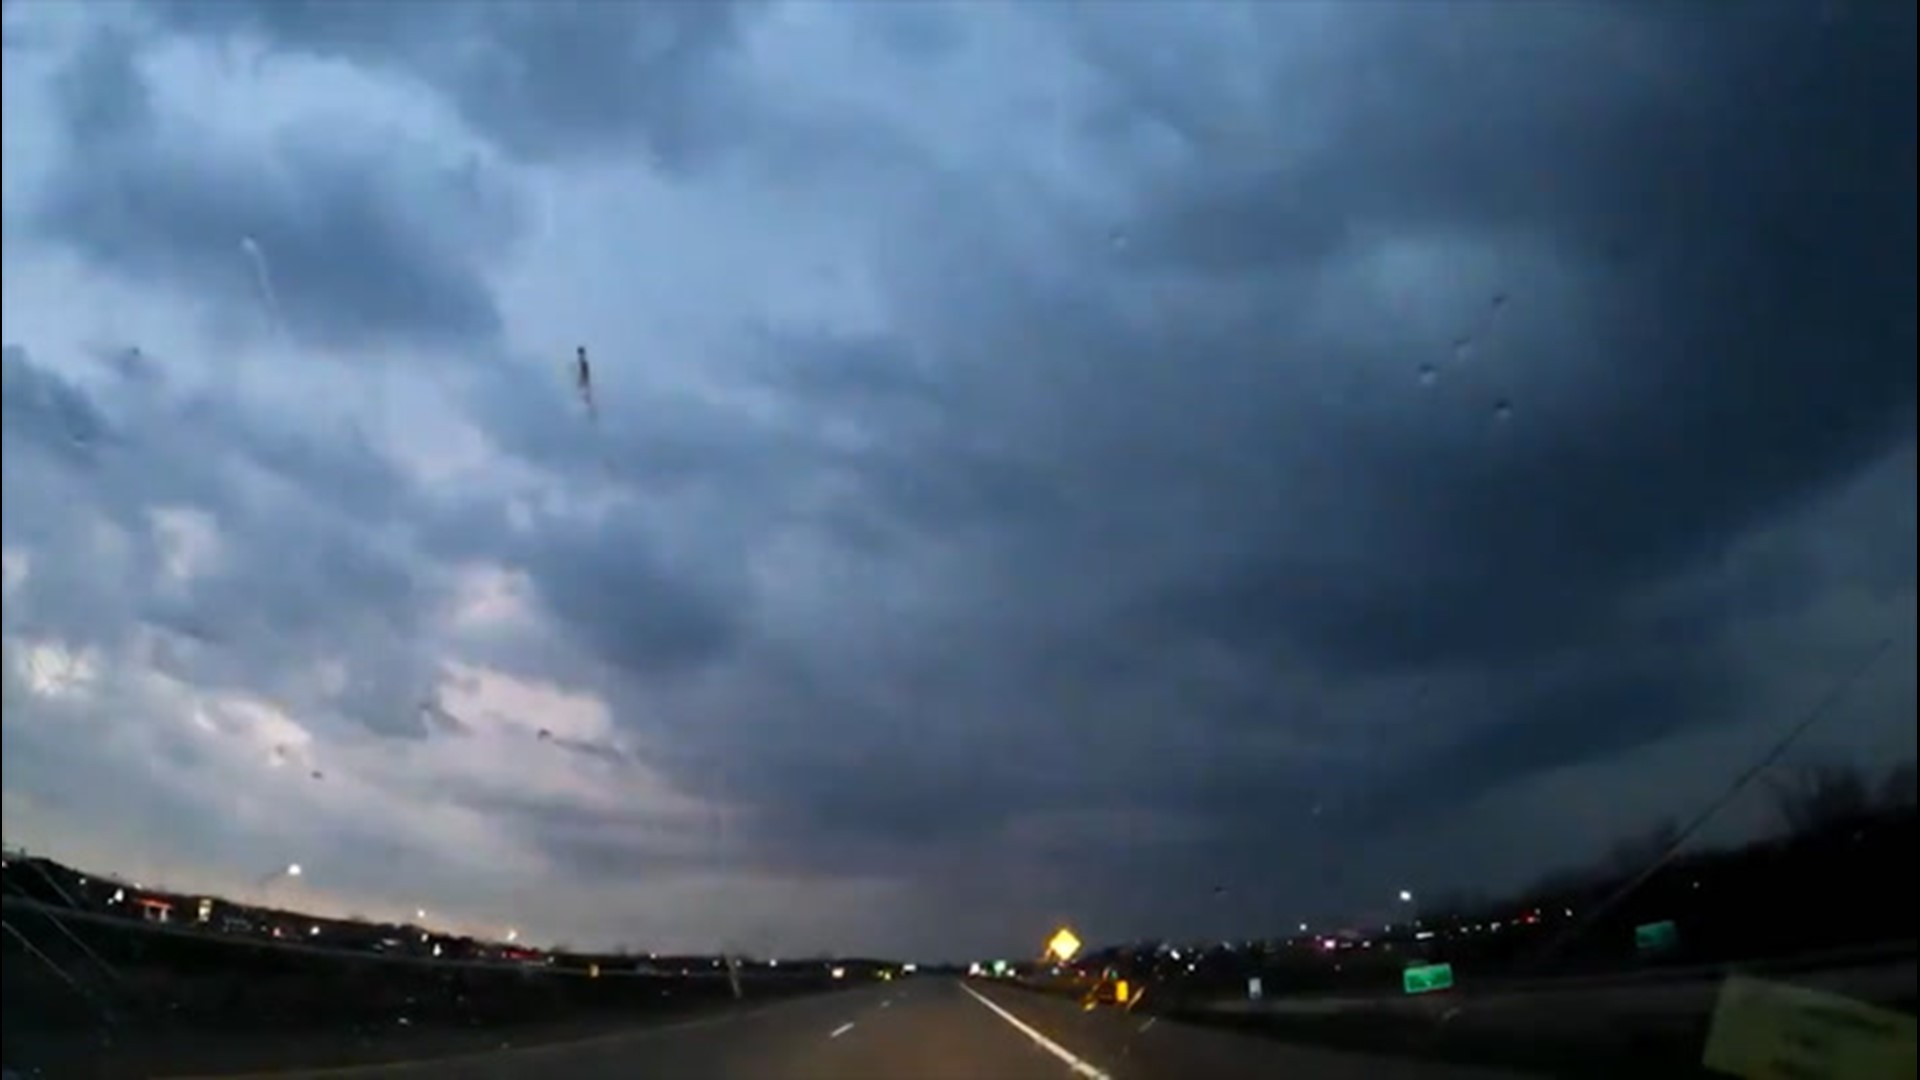 Lightning flashed in the sky in Moline, Michigan, as thunderstorms passed through on April 7.